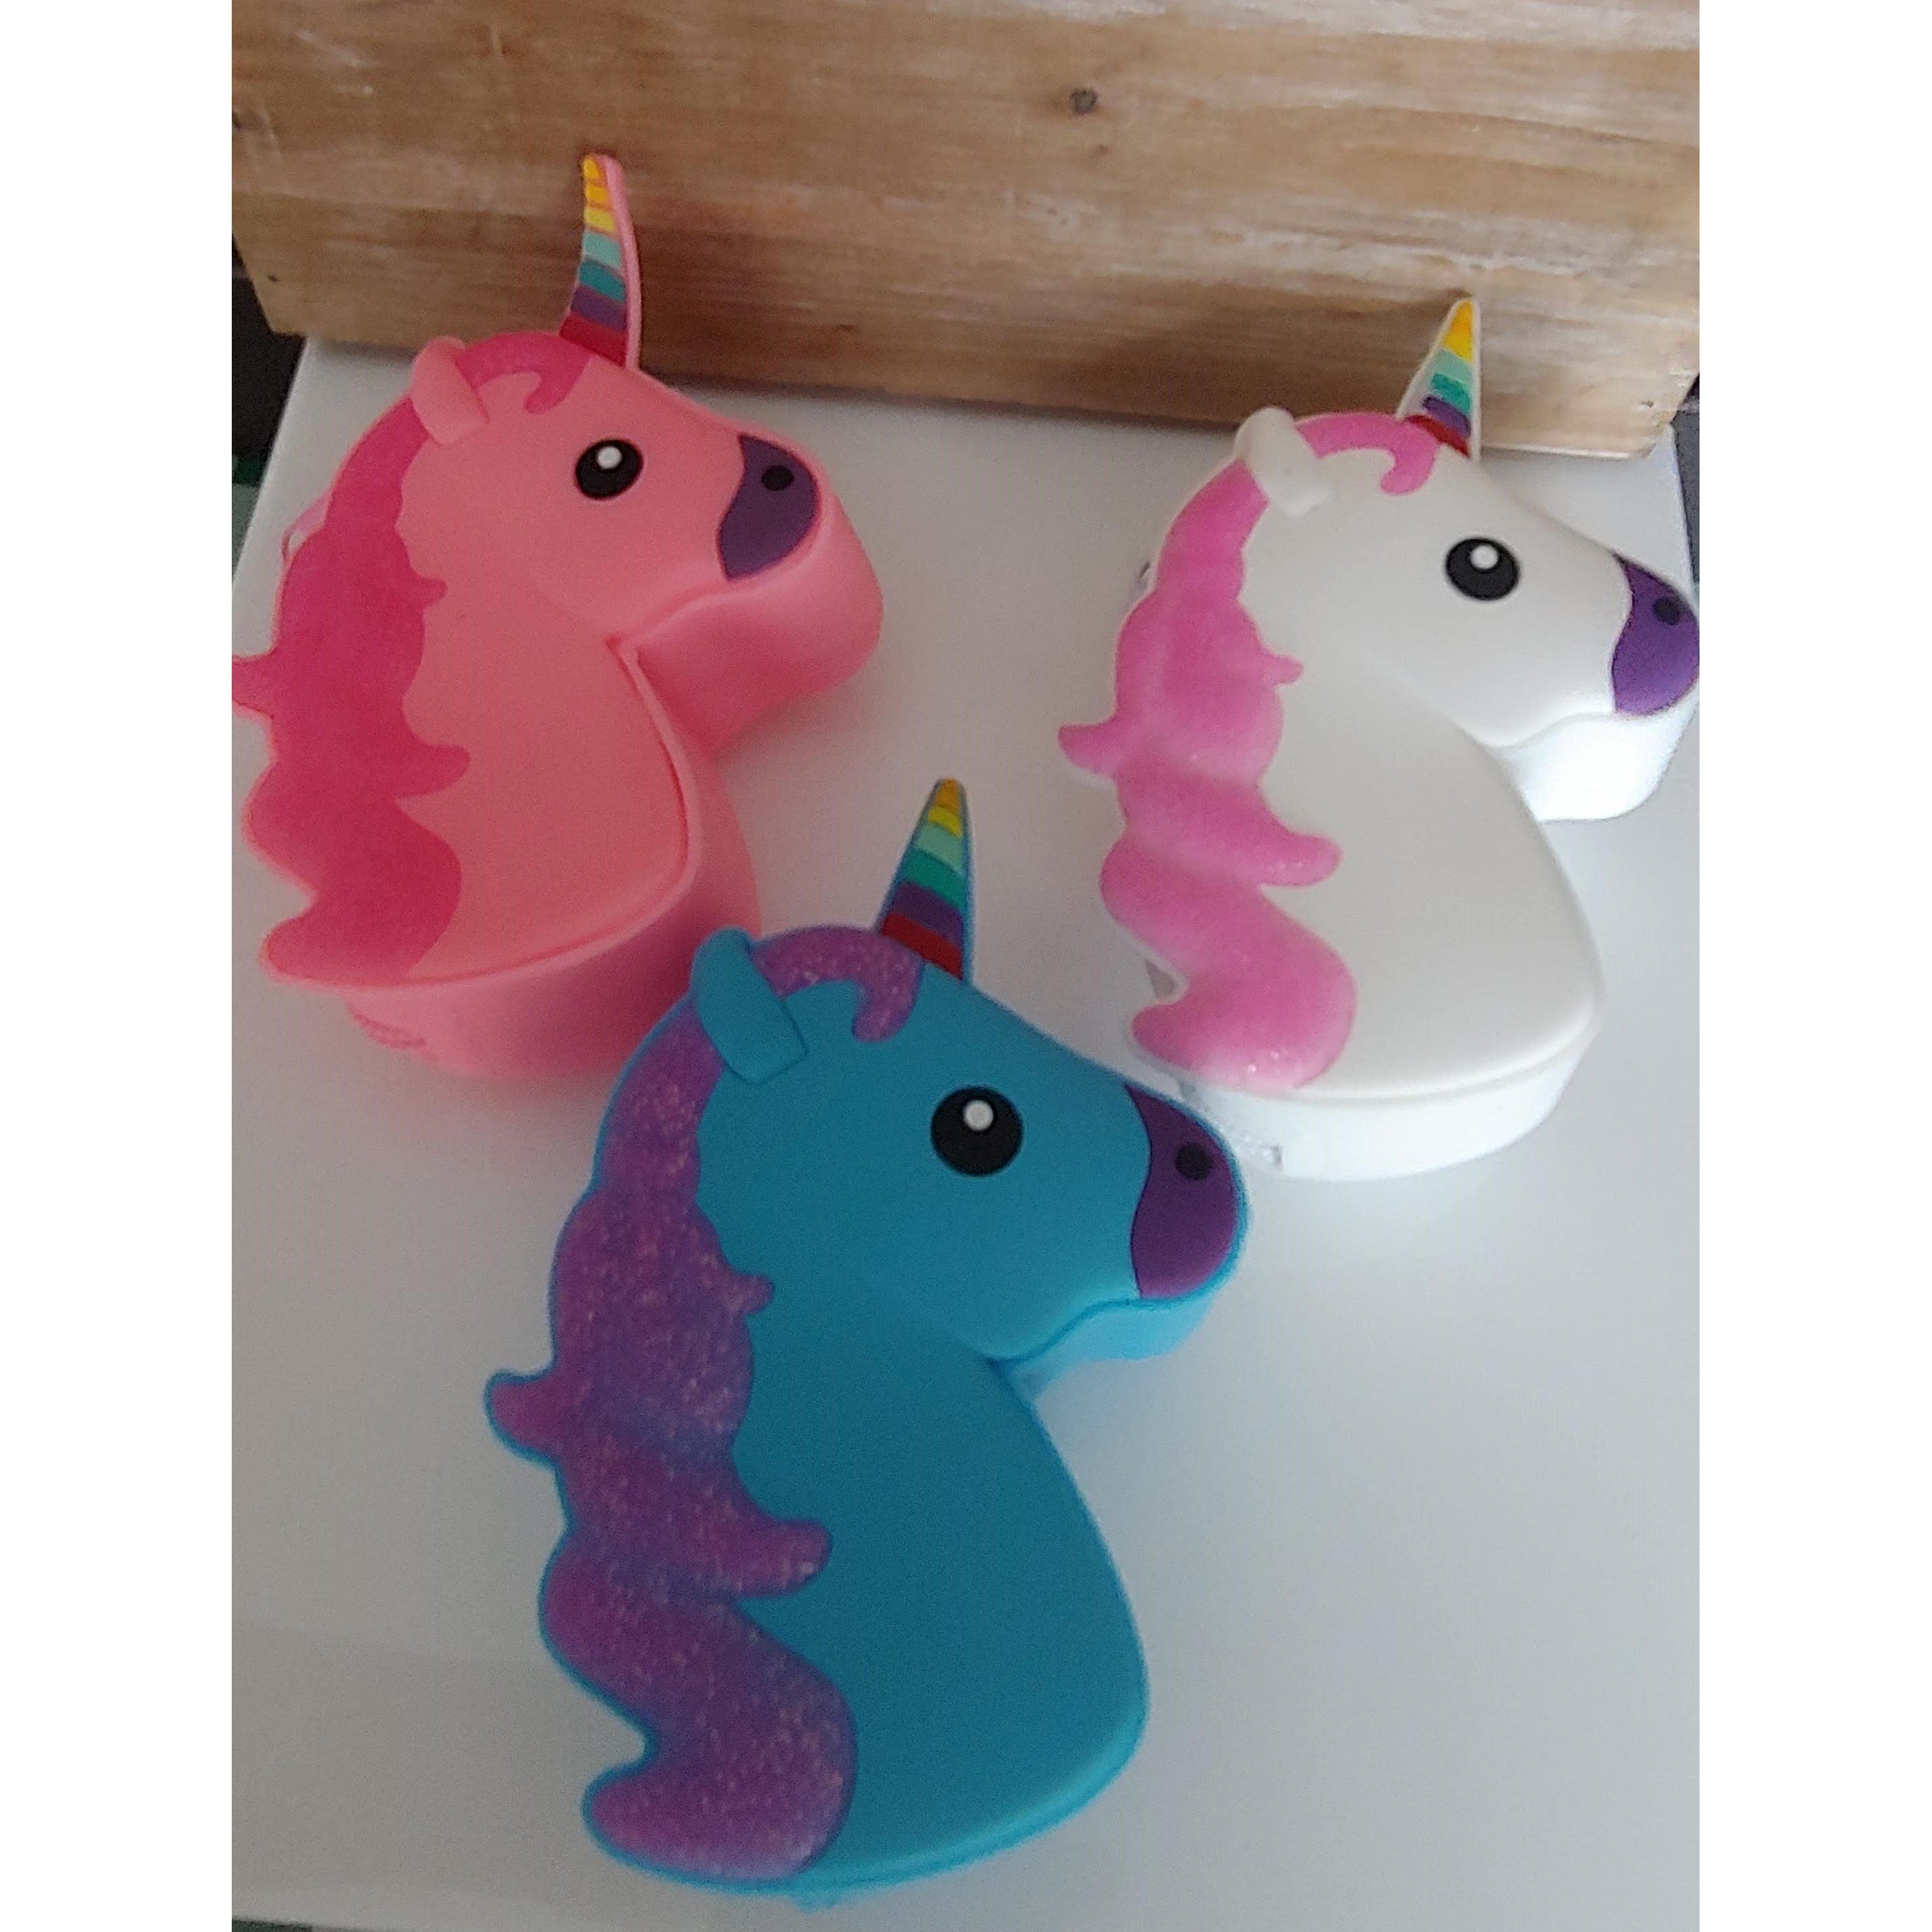 3D Unicorn Watch & Silicone Coin Purse for the Kids-Pink, Blue or White Helps Rescued Animals, Yay! - The Pink Pigs, Animal Lover's Boutique